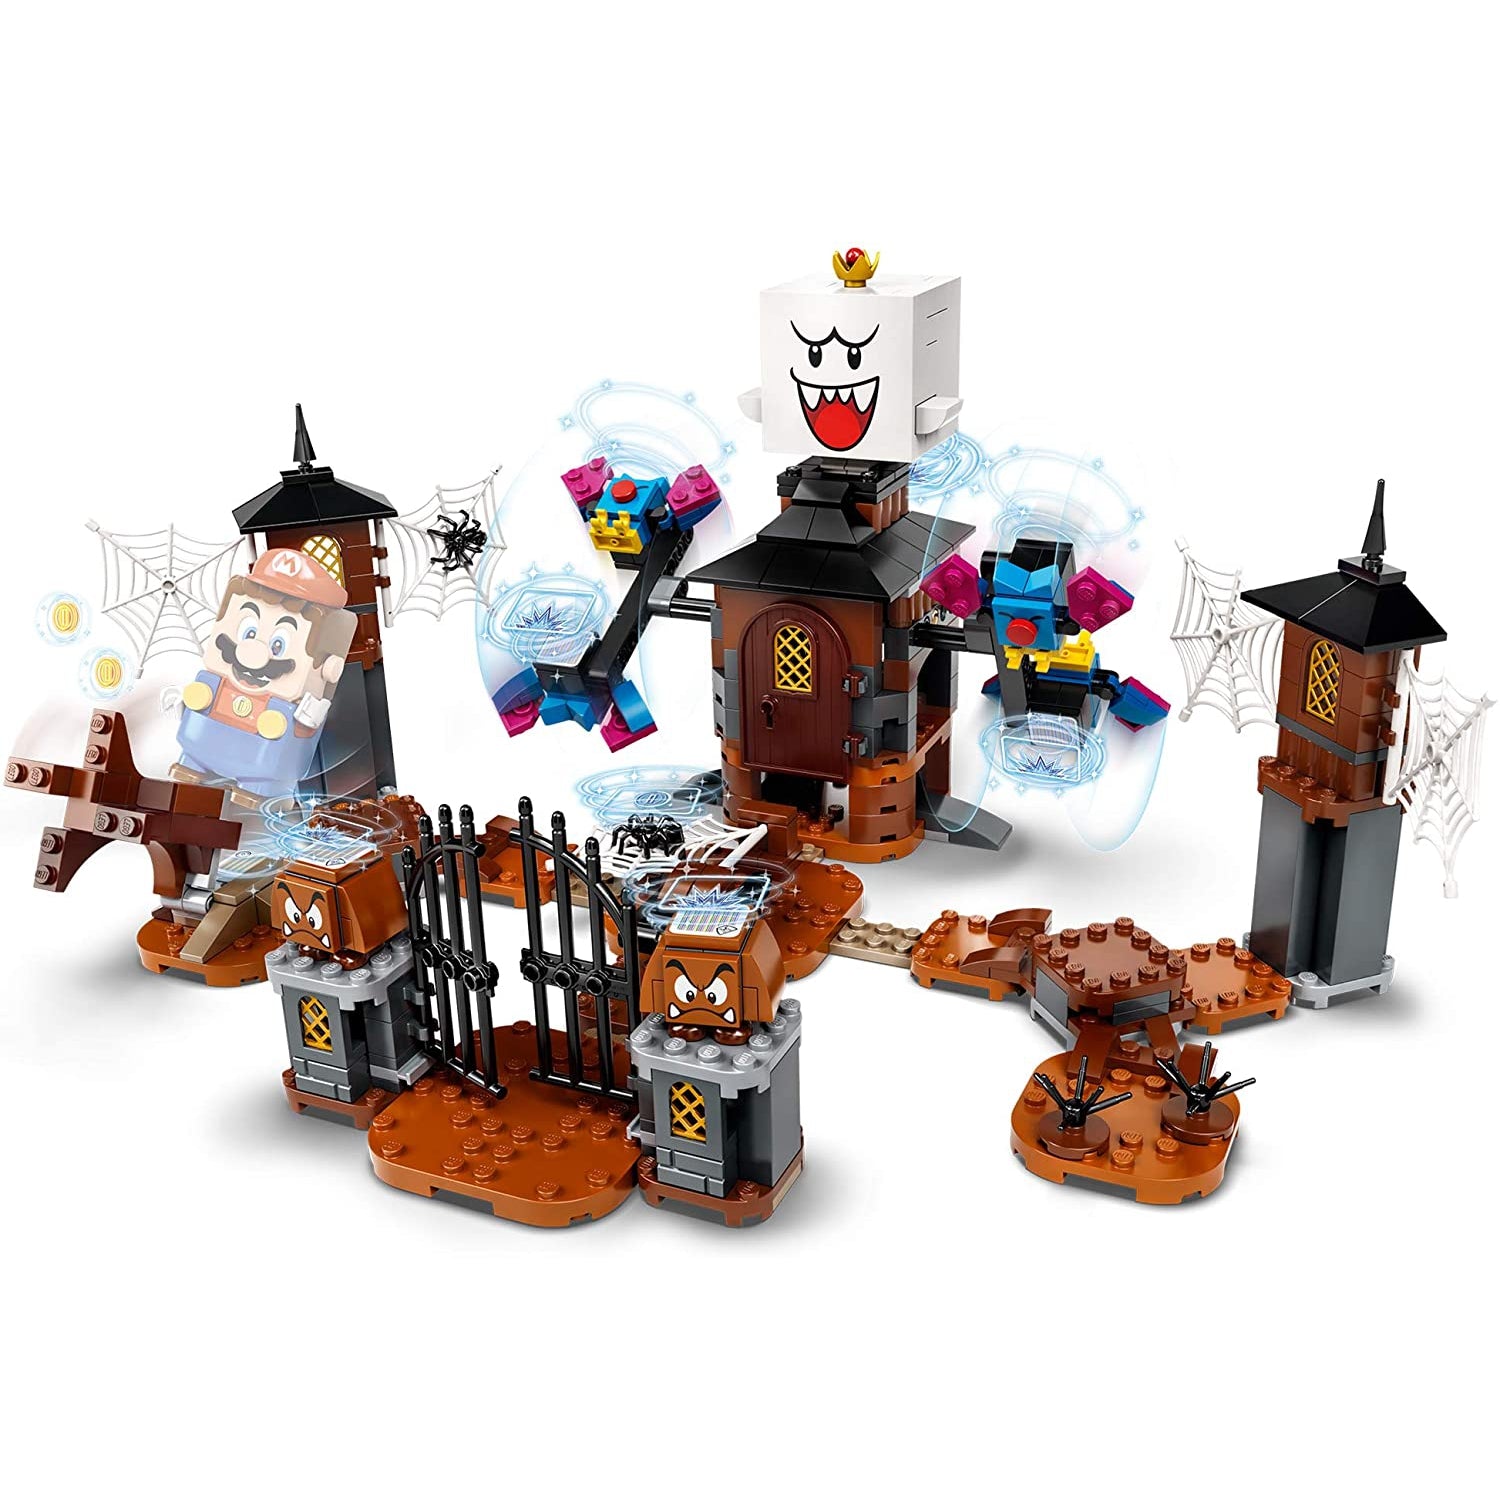 LEGO 71377 King Boo and the Haunted Yard Expansion Set